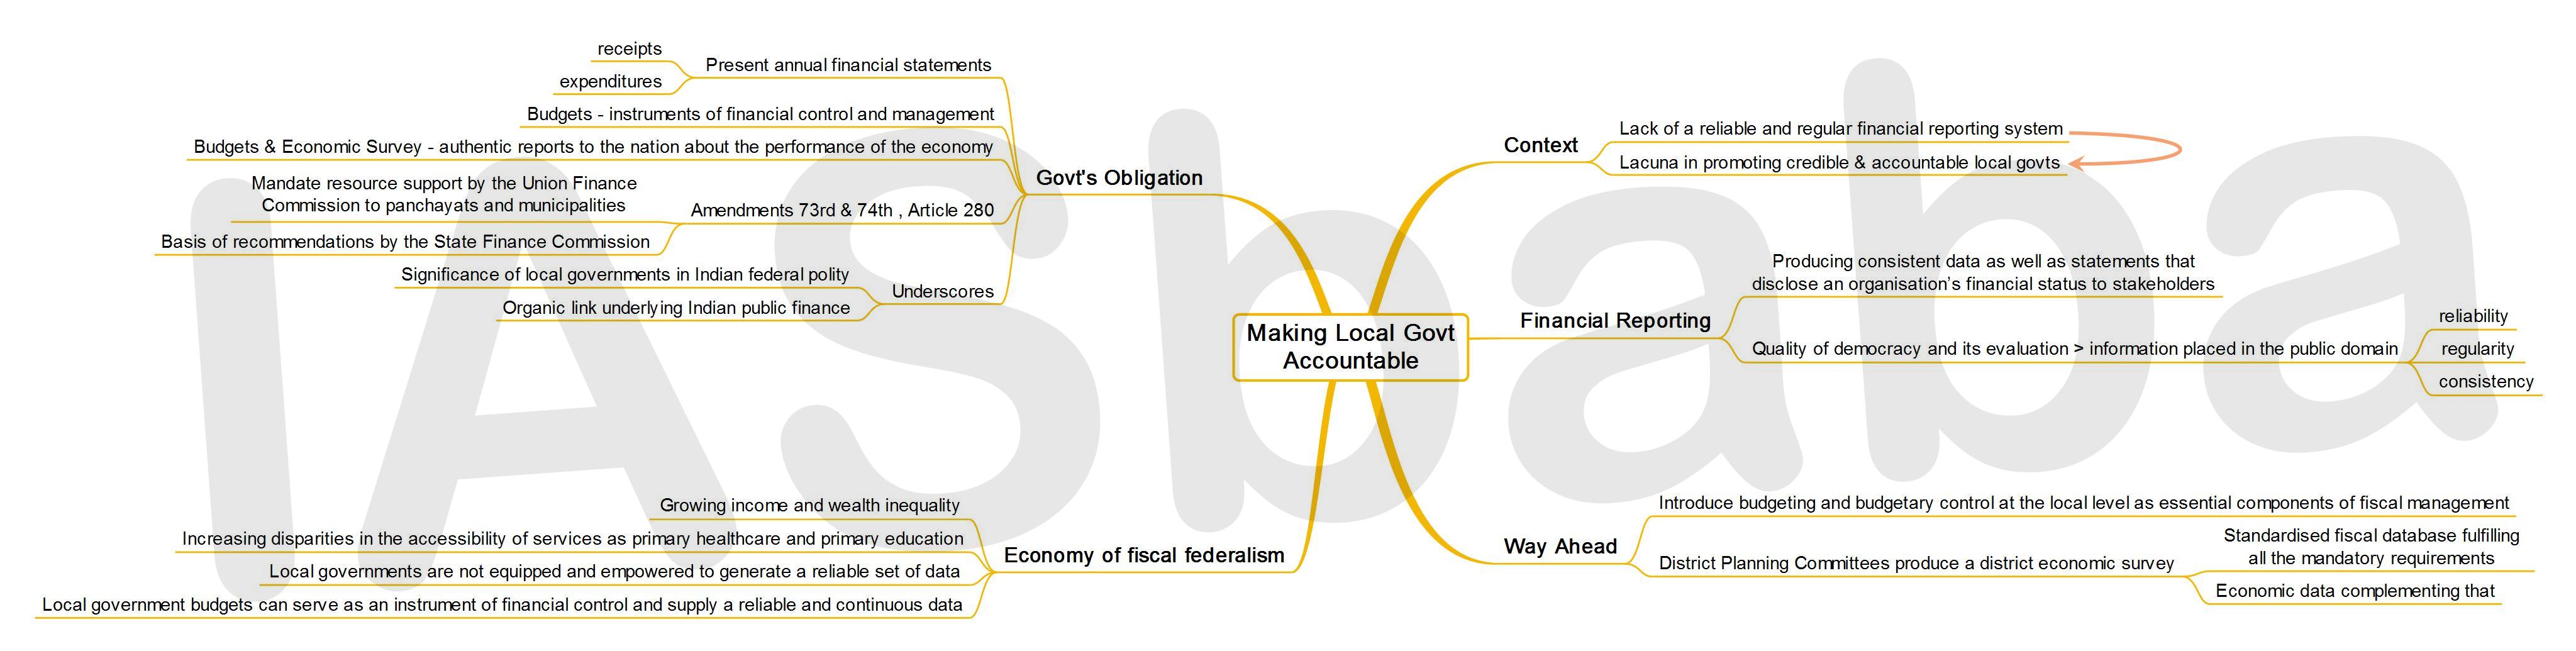 IASbaba’s MINDMAP : Issue - Making Local Governments Accountable